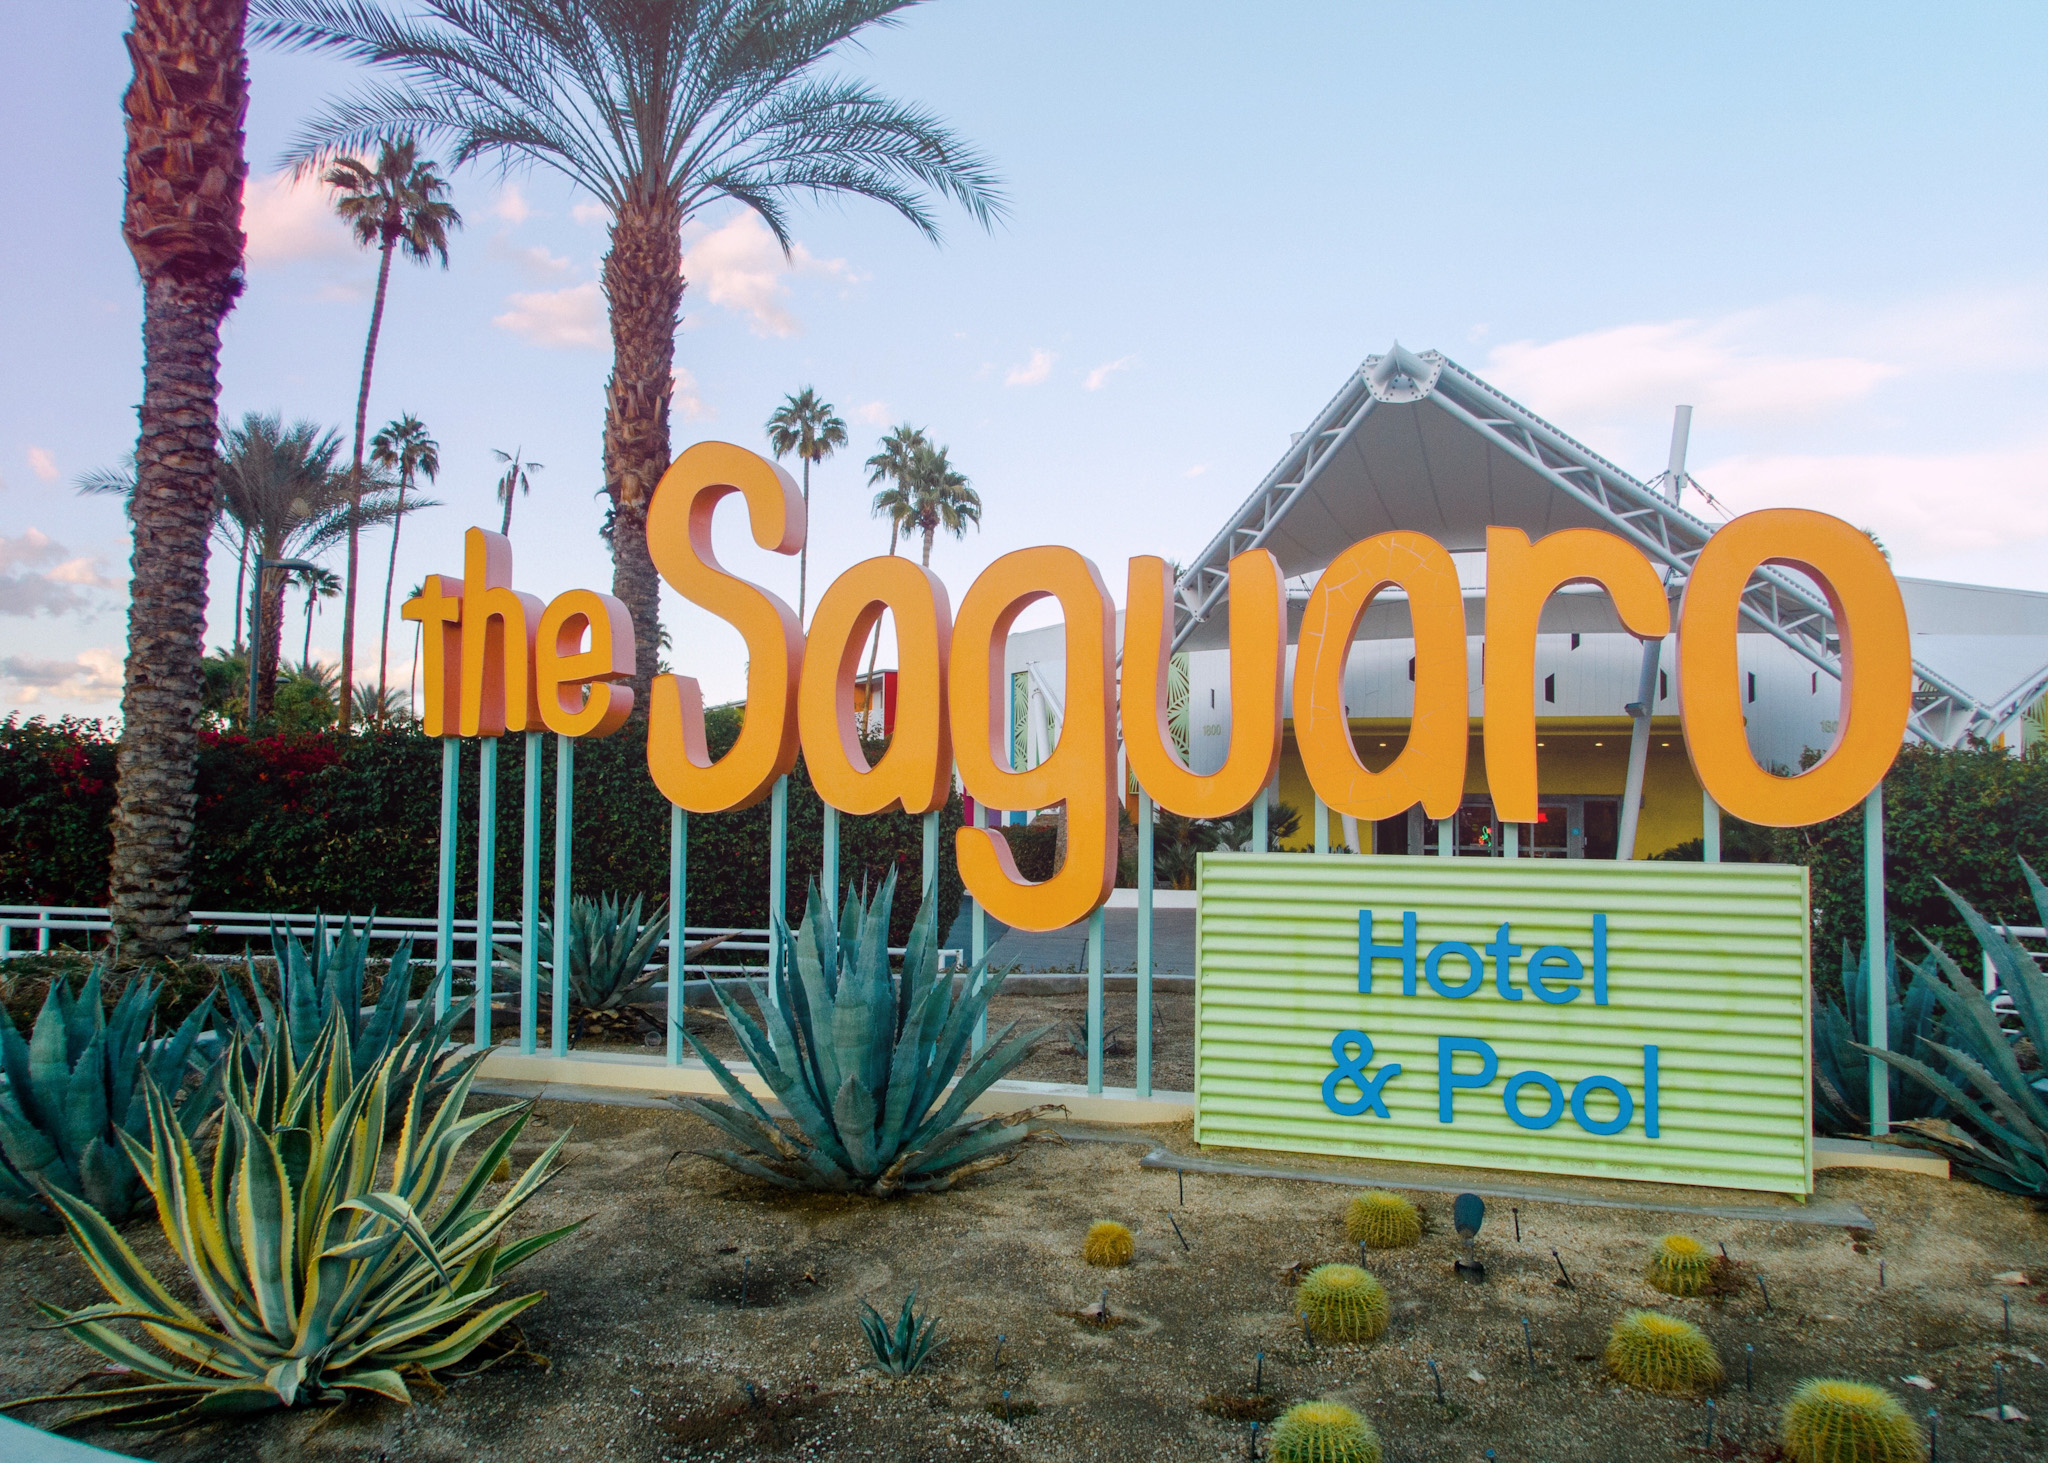 The Saguaro Hotel & Pool is a rainbow hotel in Palm Springs